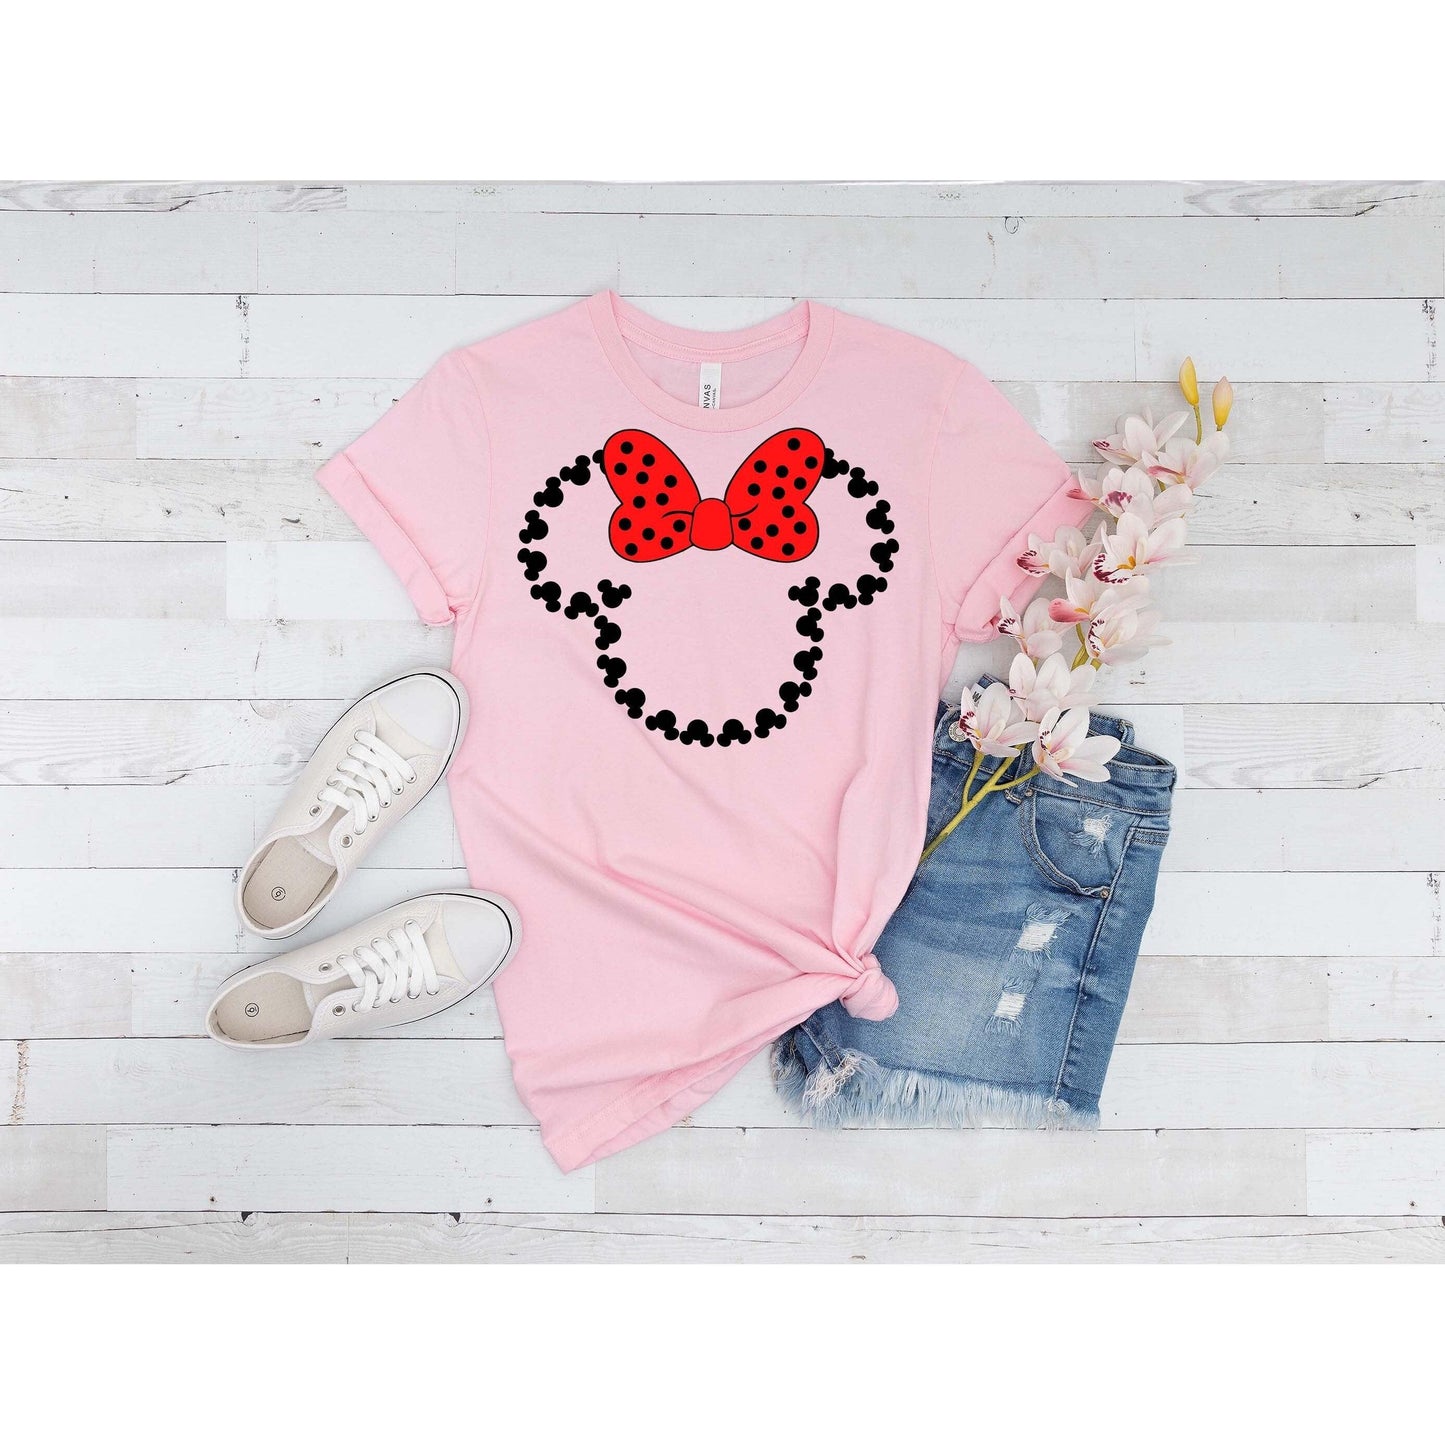 Minnie Shirt, Adult Minnie Mouse Shirt, Toddle Minnie Shirt, Woman Minnie Mouse shirt, Minnie T-shirt